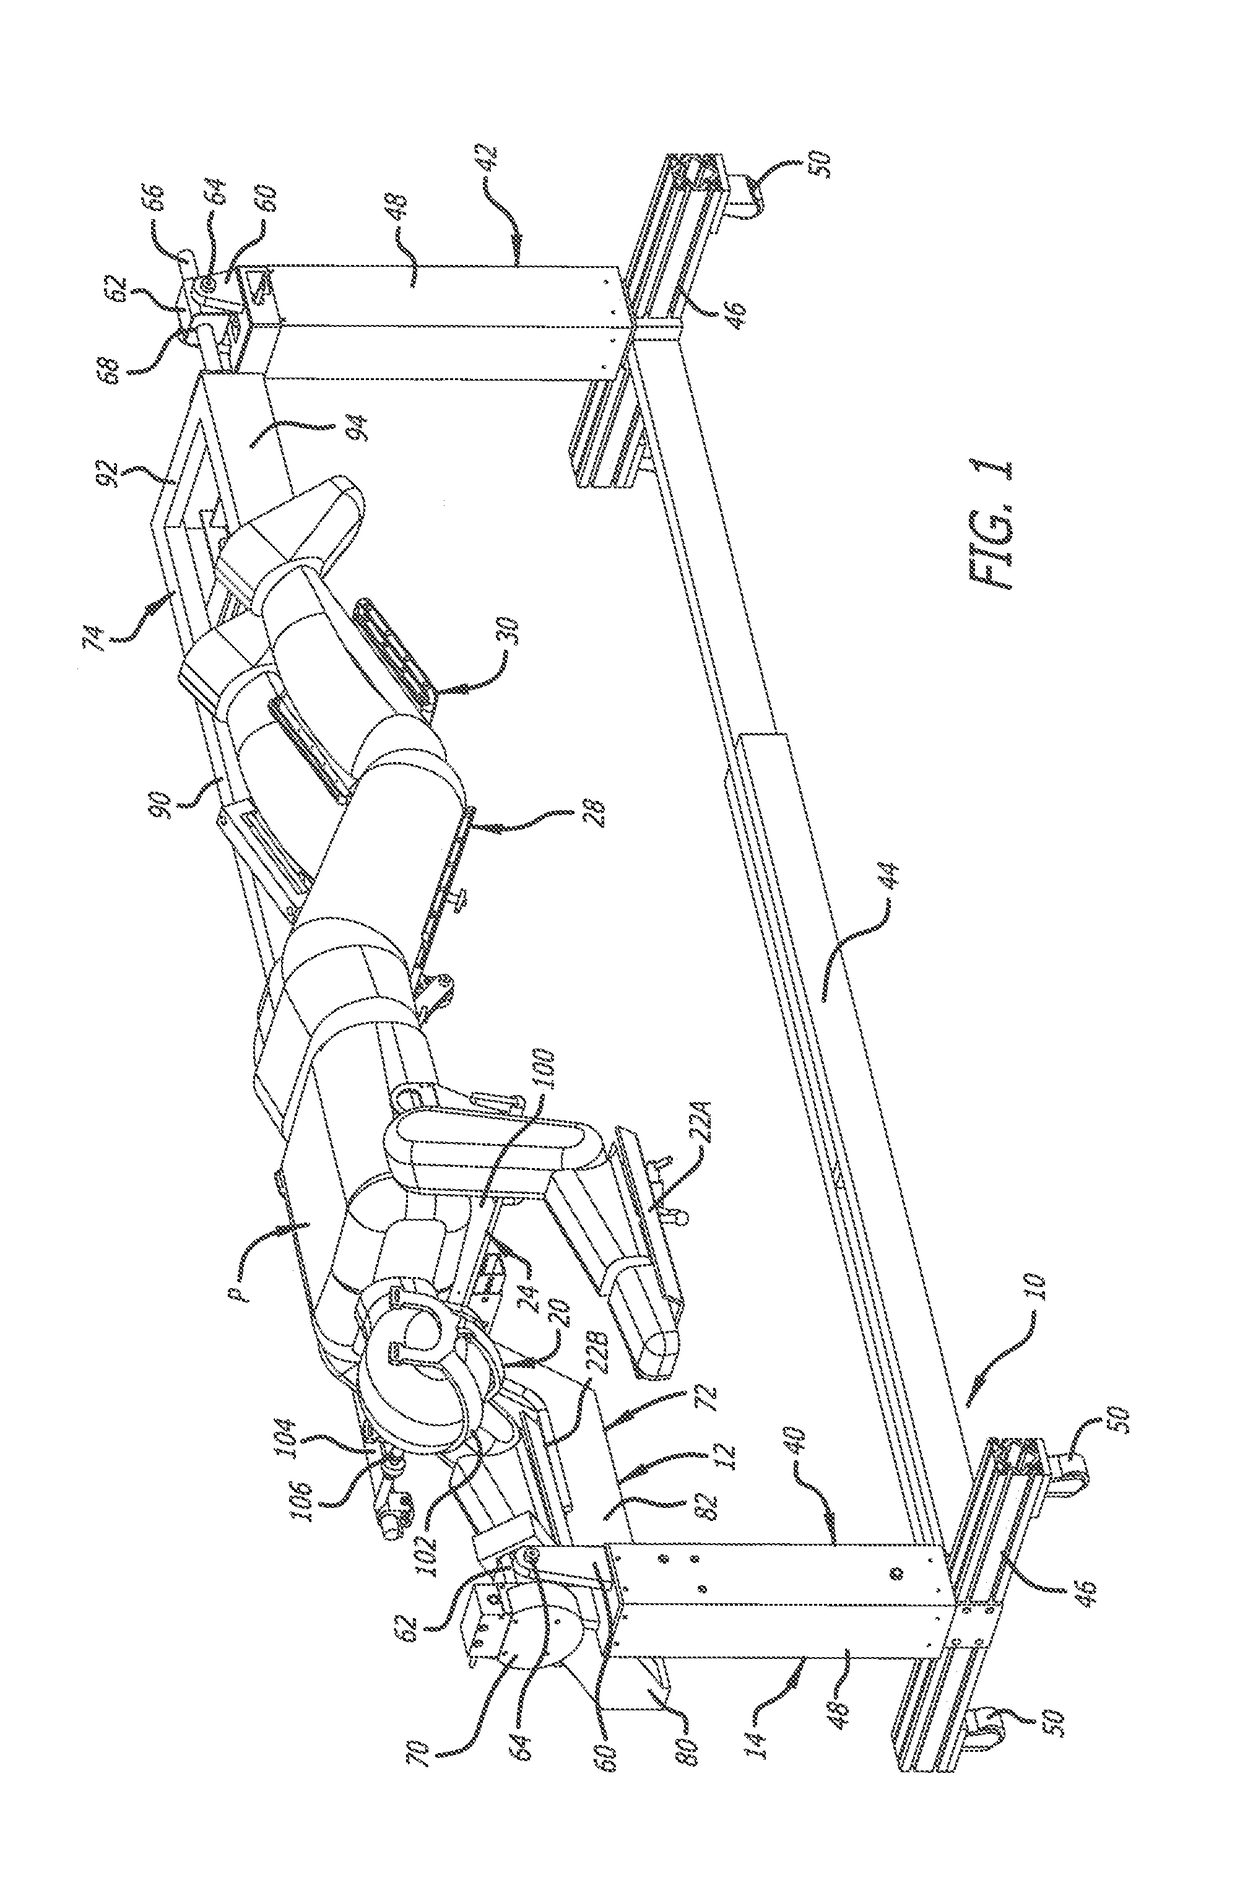 Surgical frame and method for use thereof facilitating patient transfer